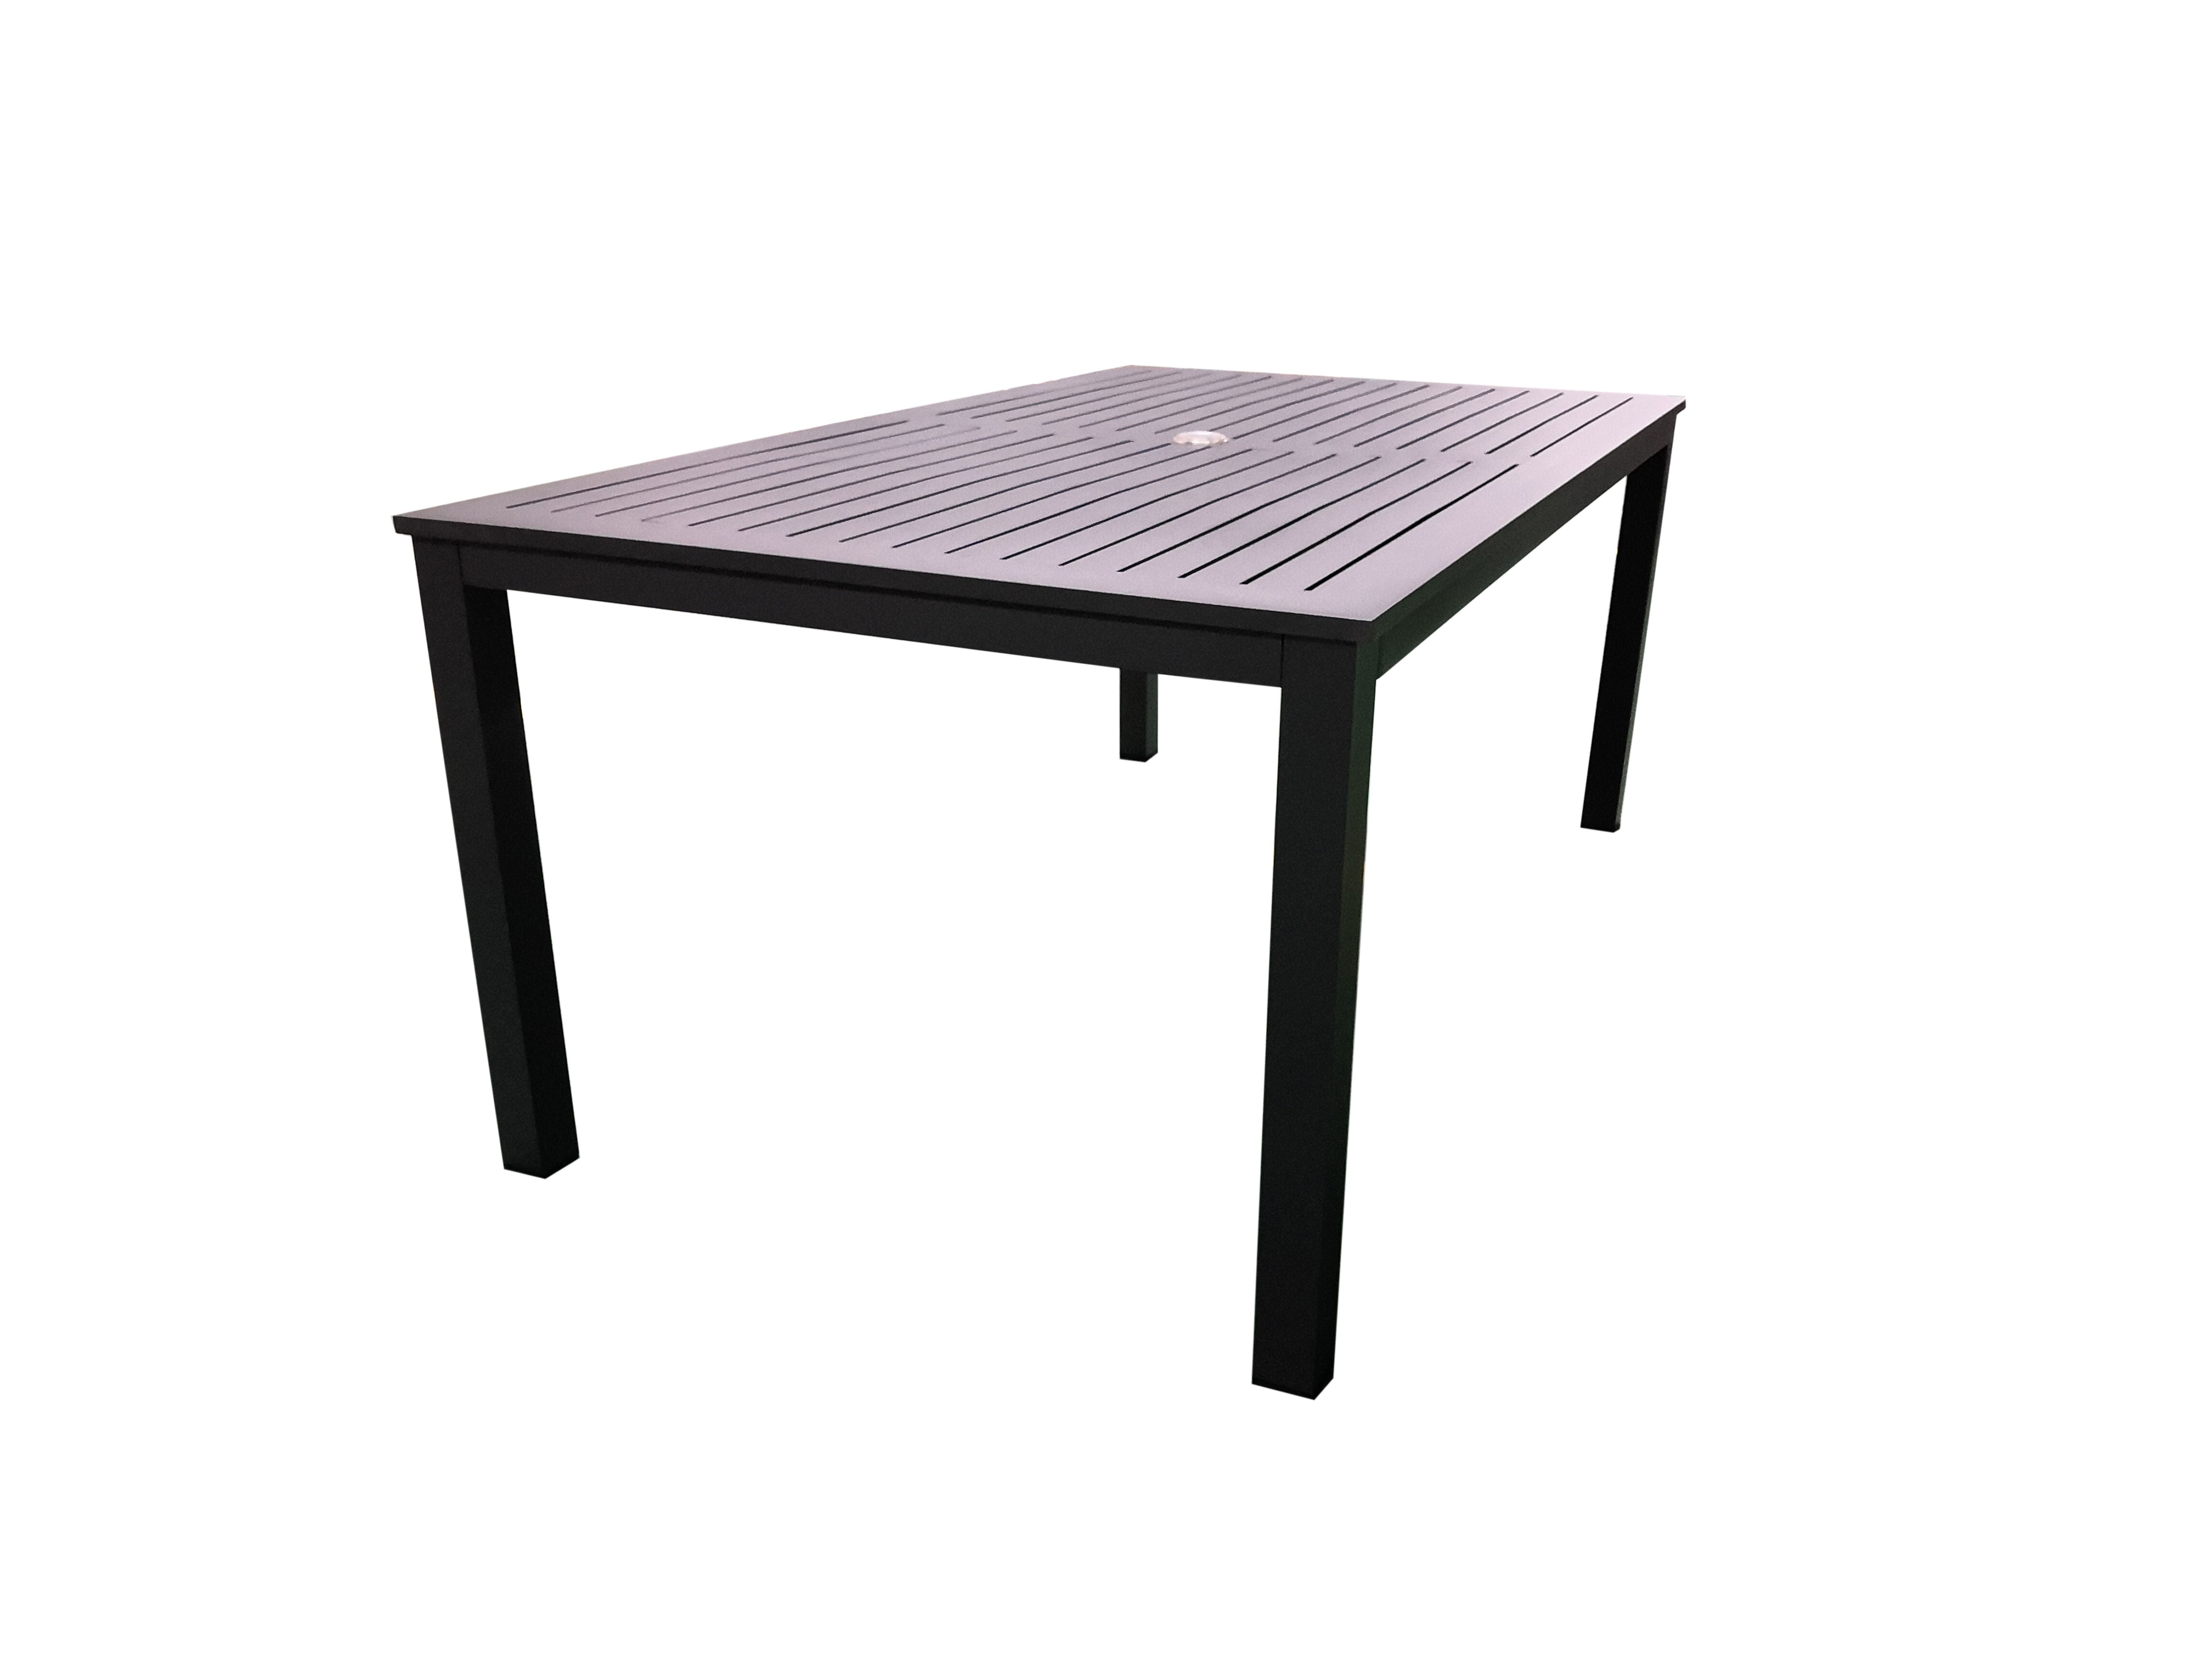 PatioZone Dining Table with Slated Tabletop w/Umbrella Hole in Middle and Aluminum Frame (MOSS-T304C) - Matte Charcoal